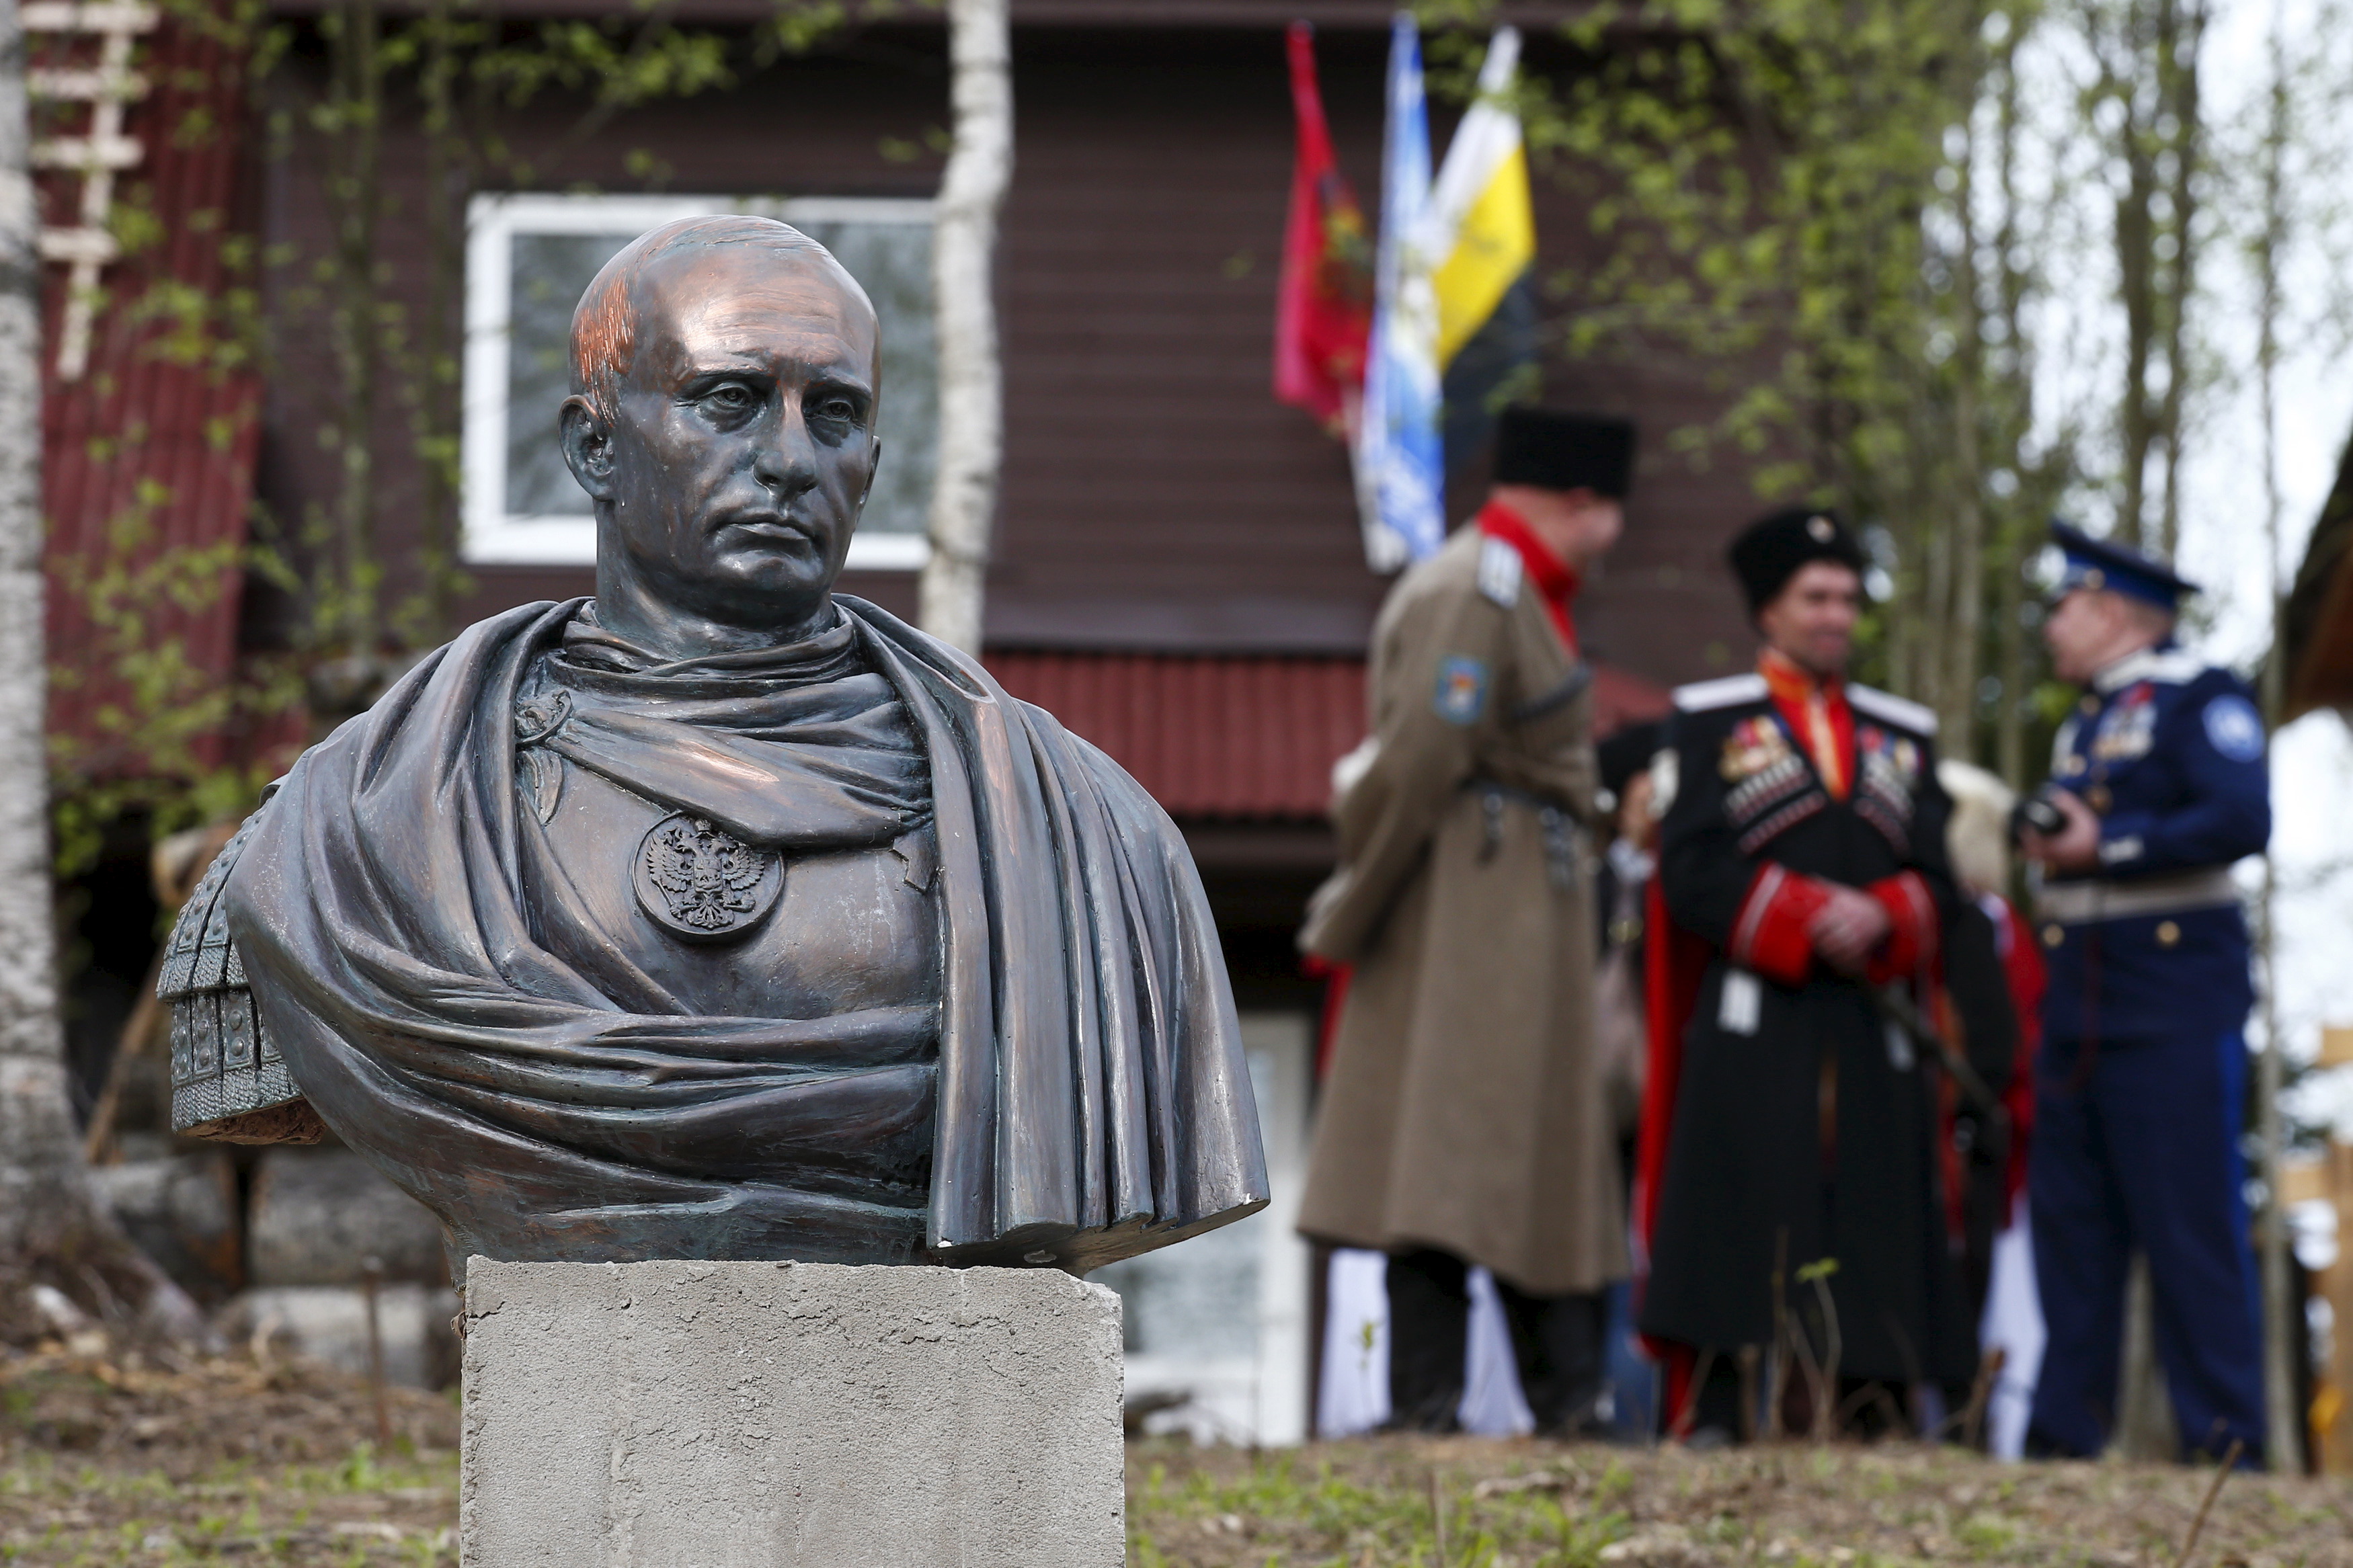 Cossacks stand behind a bust of Russian President Putin which depicts him as a Roman emperor, during its unveiling ceremony in Leningrad region